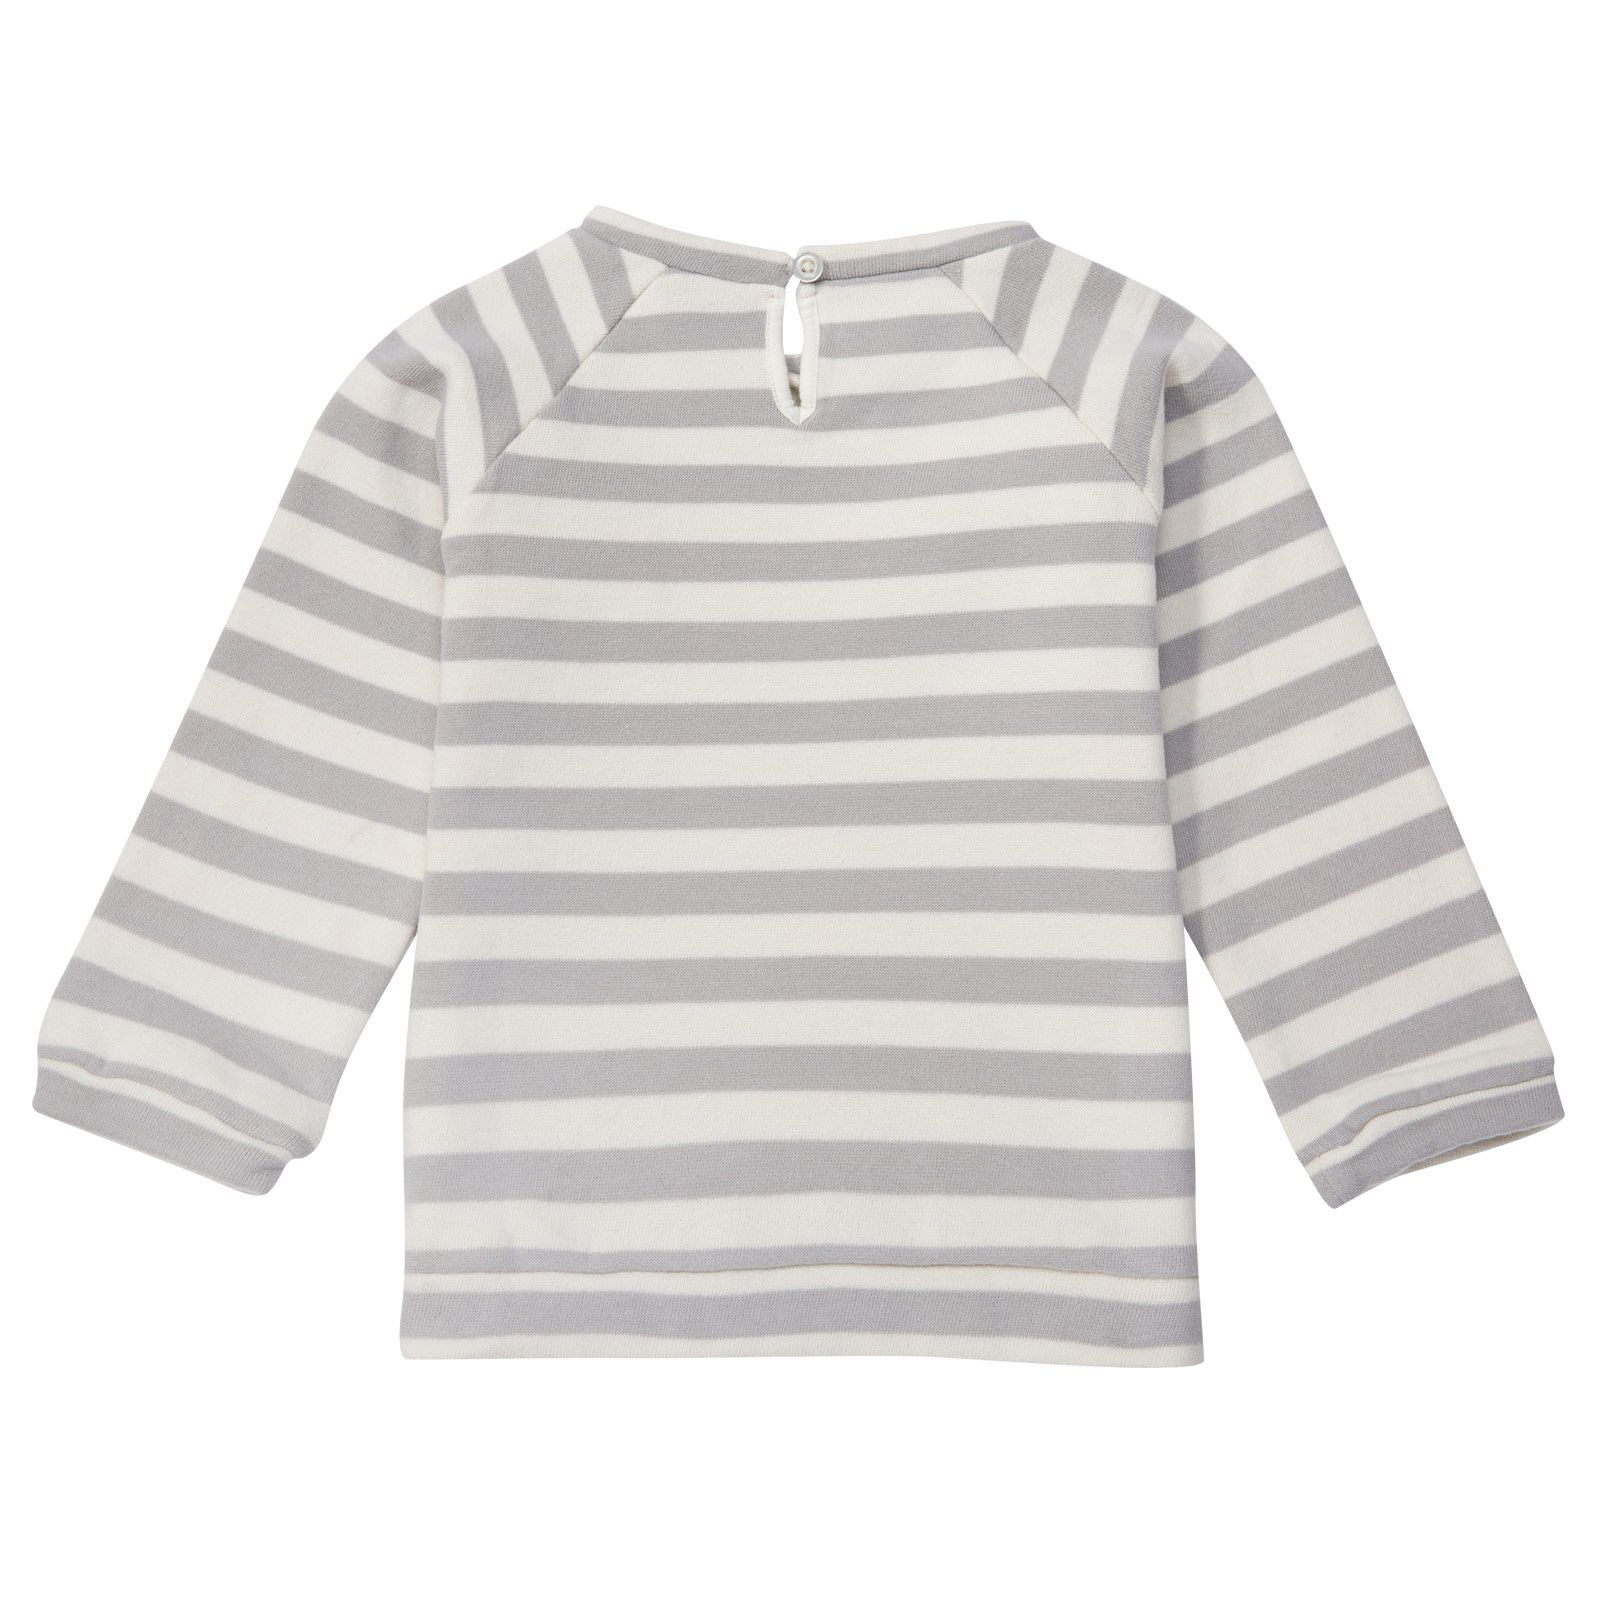 Baby Boys White&Grey Stripe Embroidered Monster Sweater - CÉMAROSE | Children's Fashion Store - 2